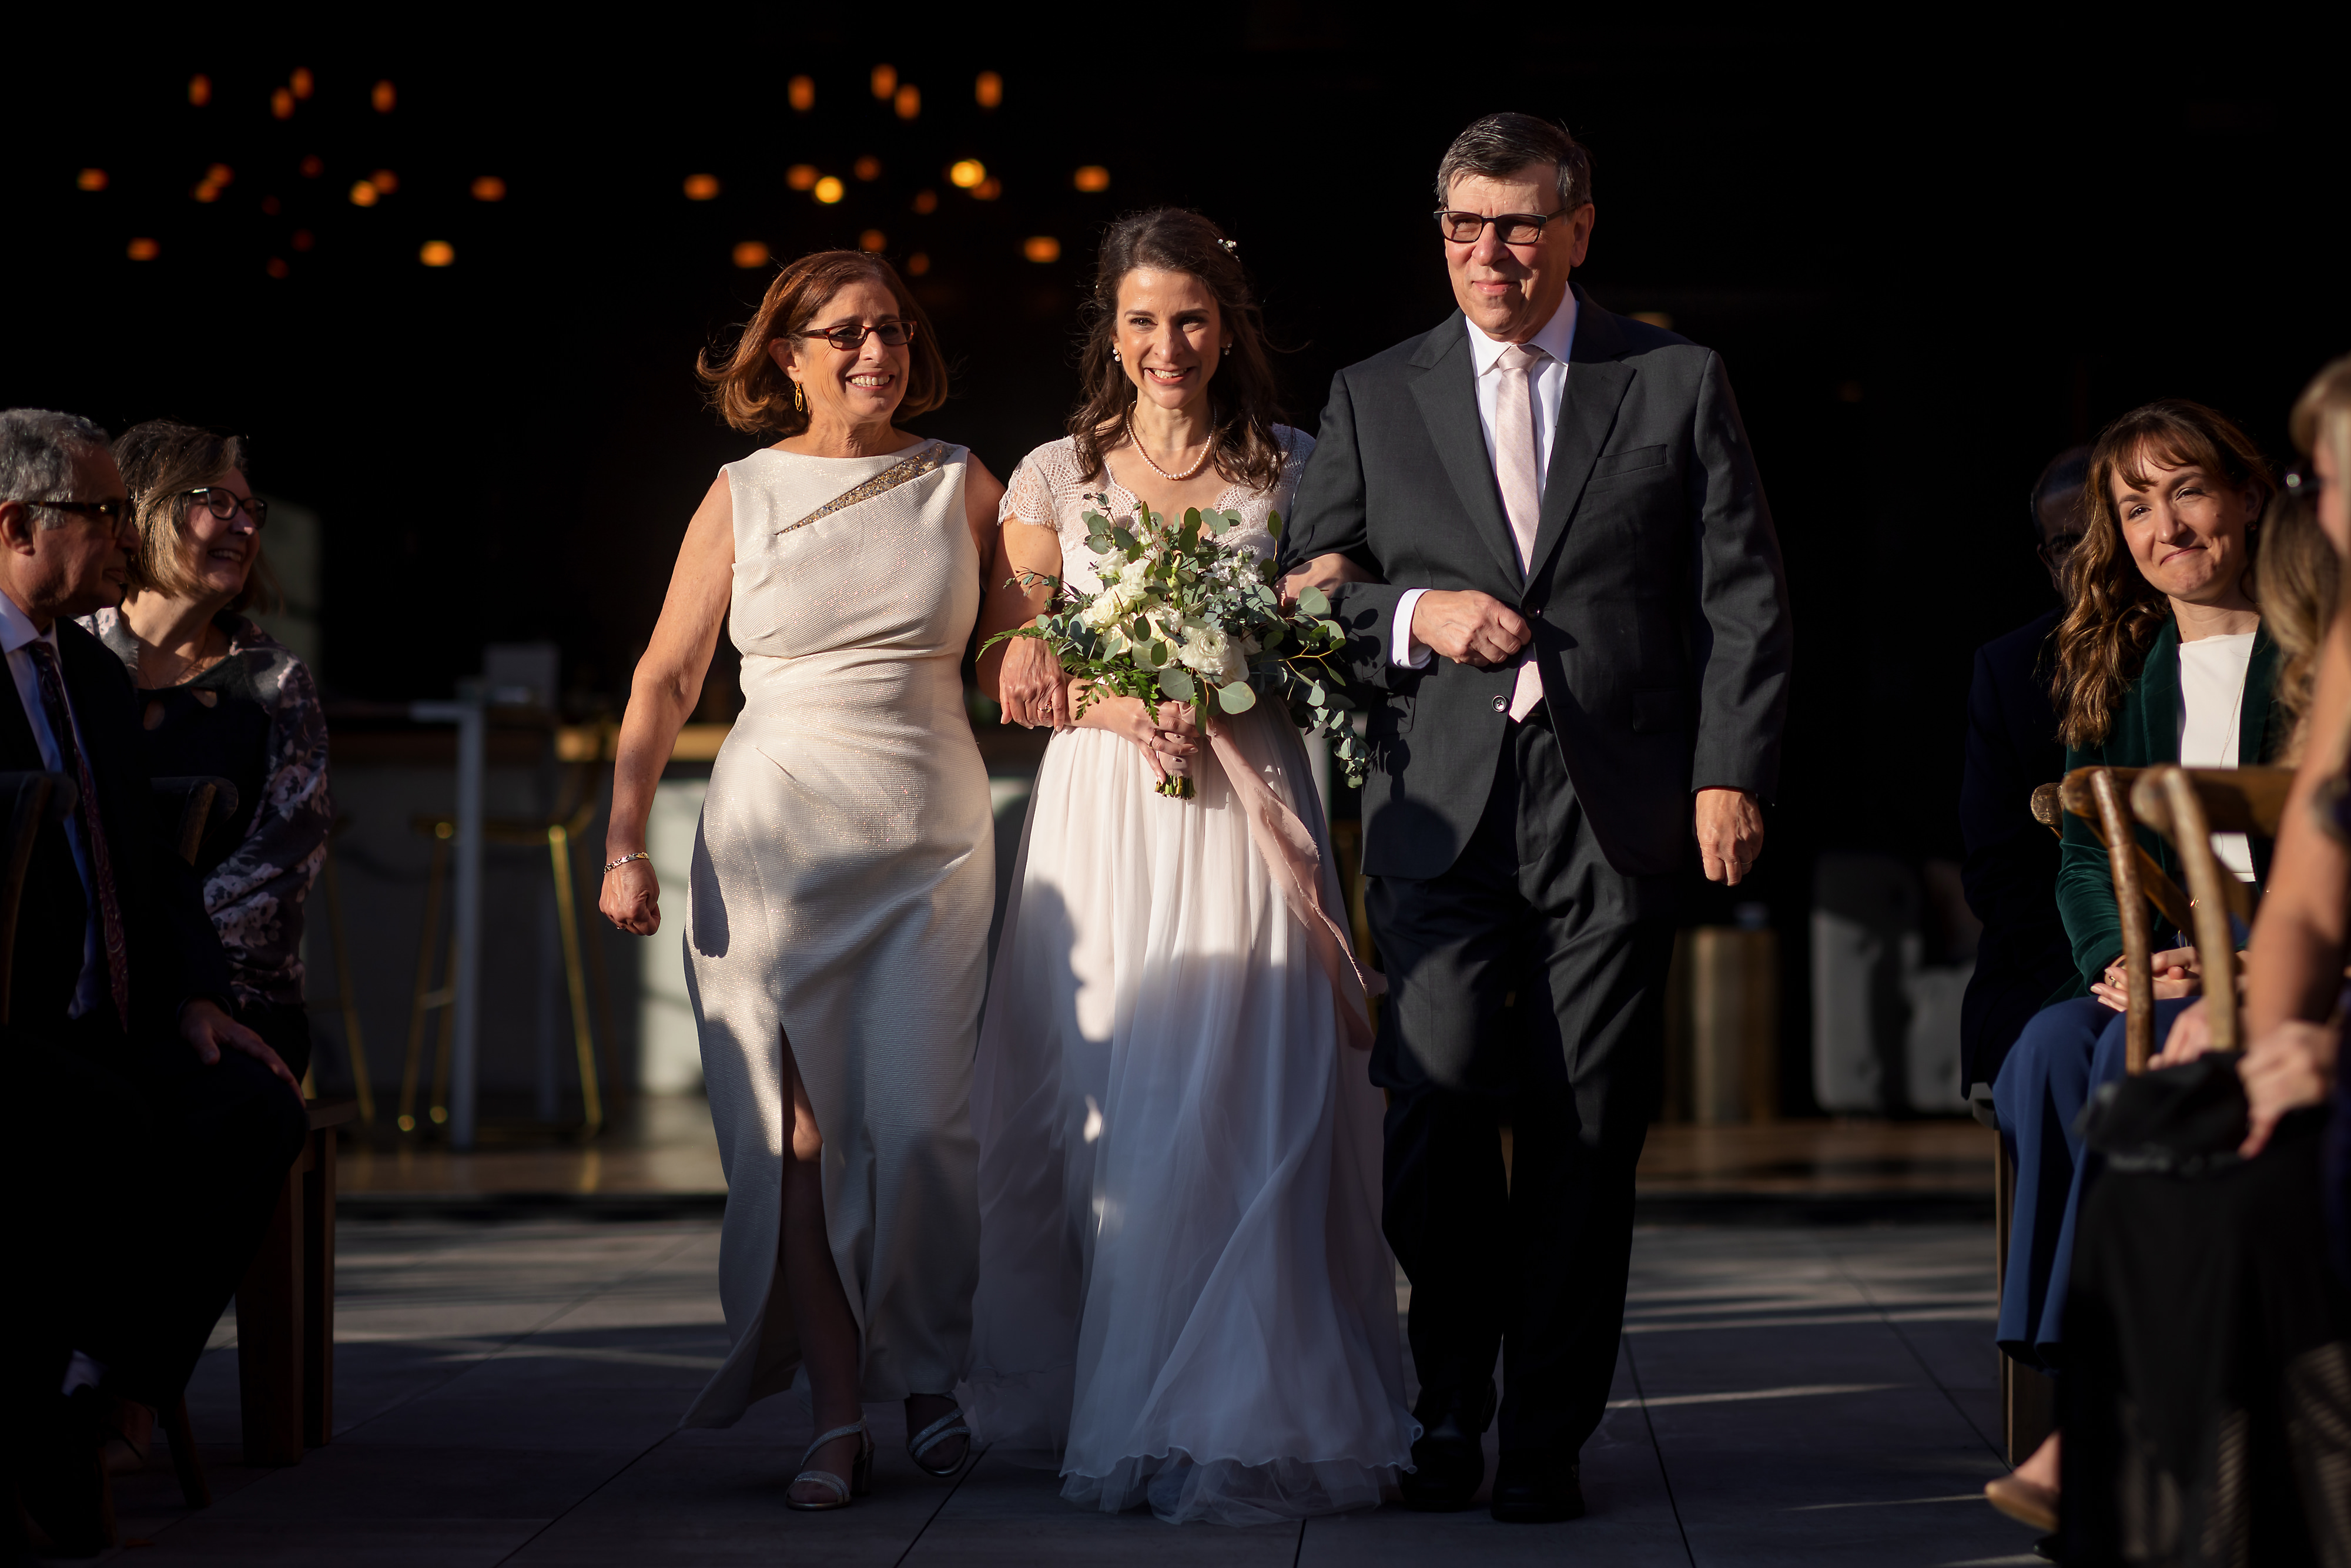 Bride and parents walk down the aisle during wedding ceremony at Loft Lucia in Chicago's West Loop neighborhood.